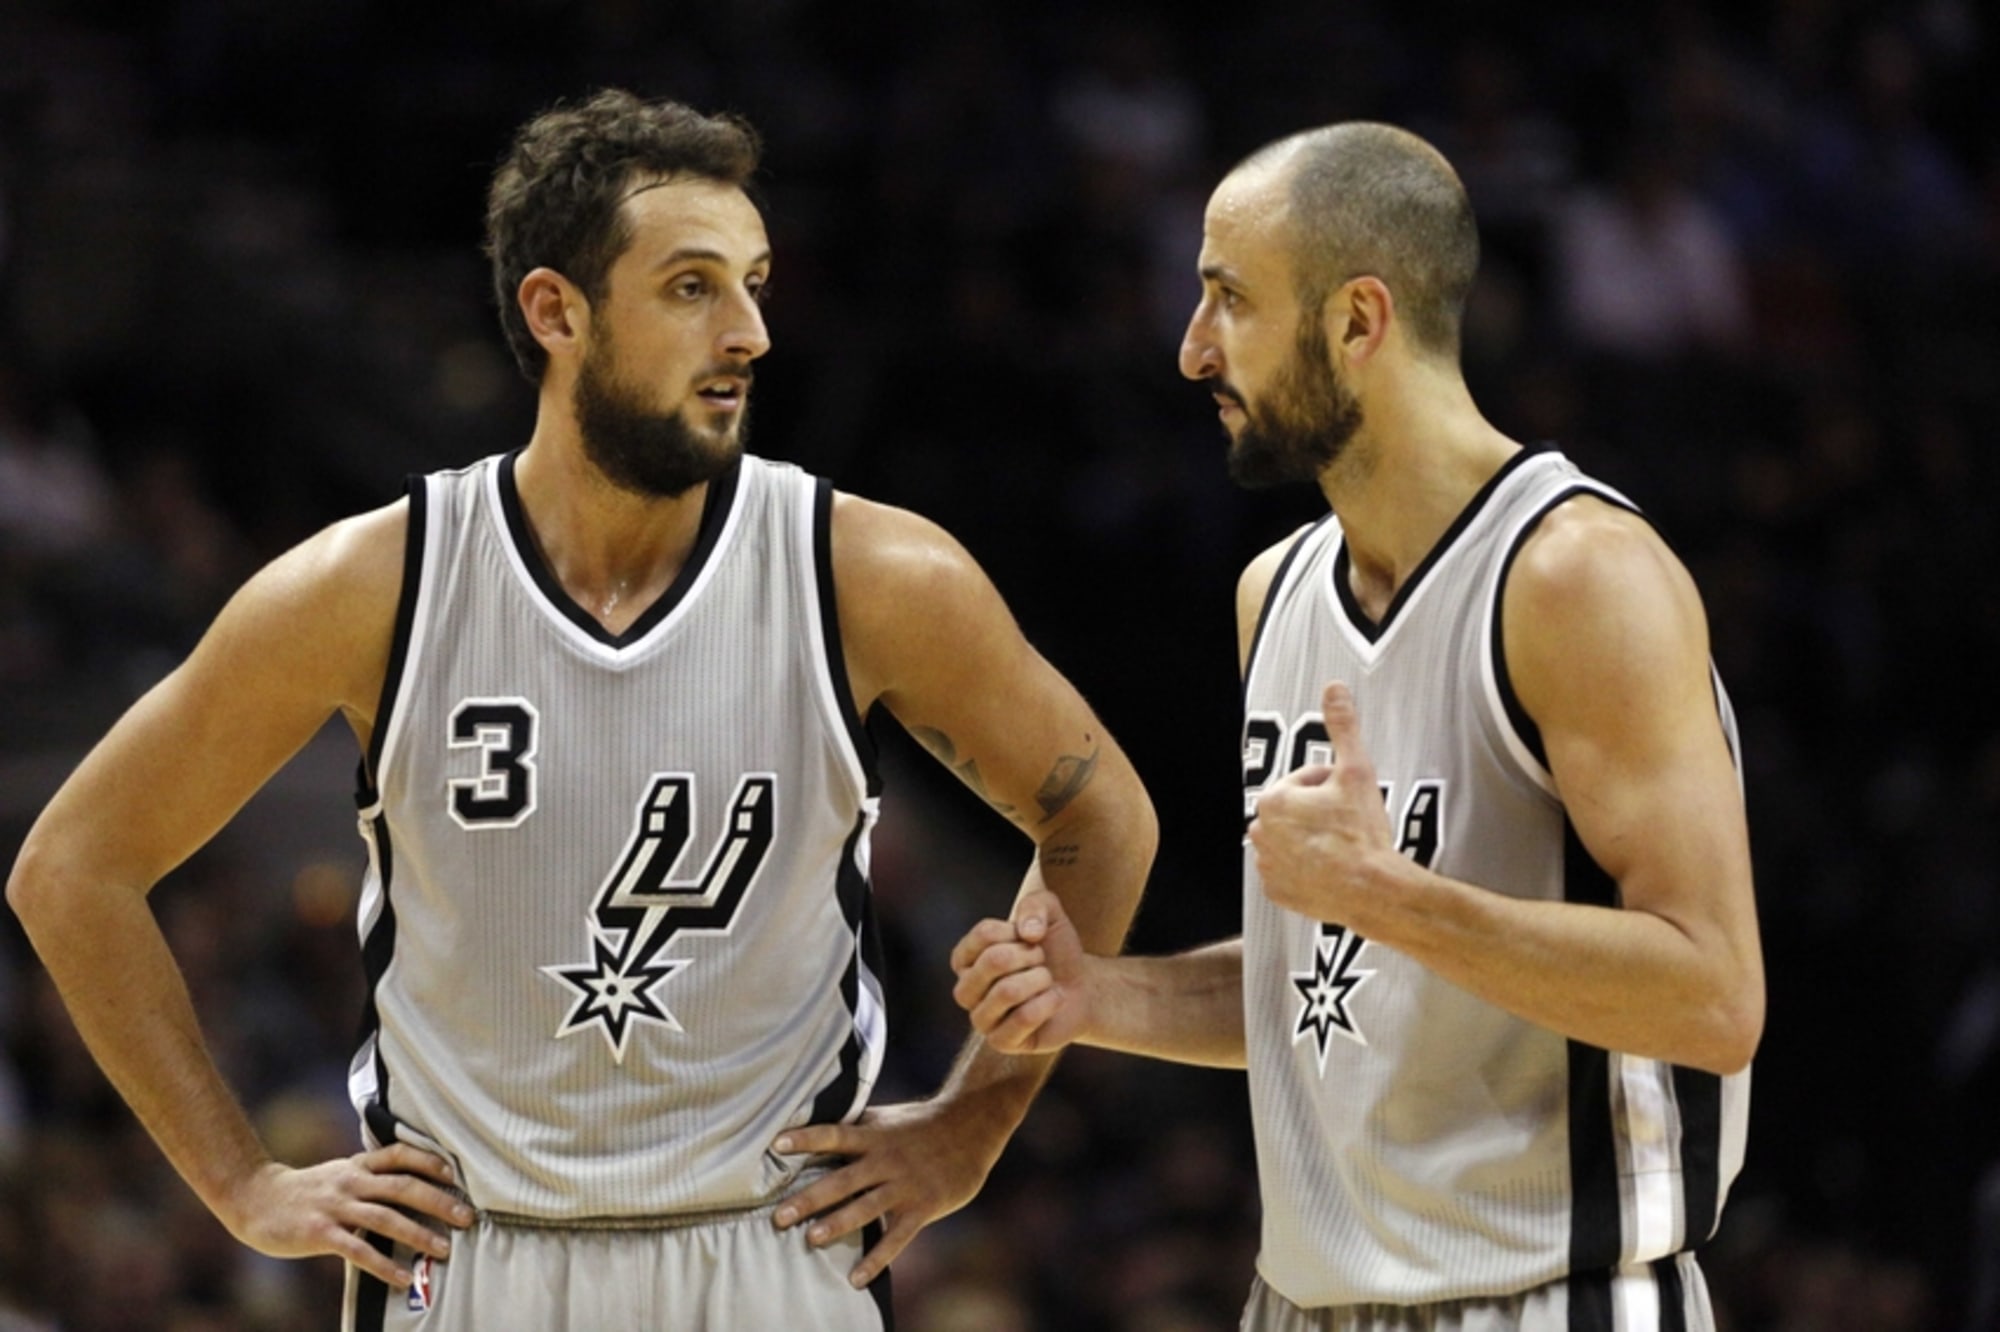 Marco Belinelli signs three-year deal in Italy after NBA career